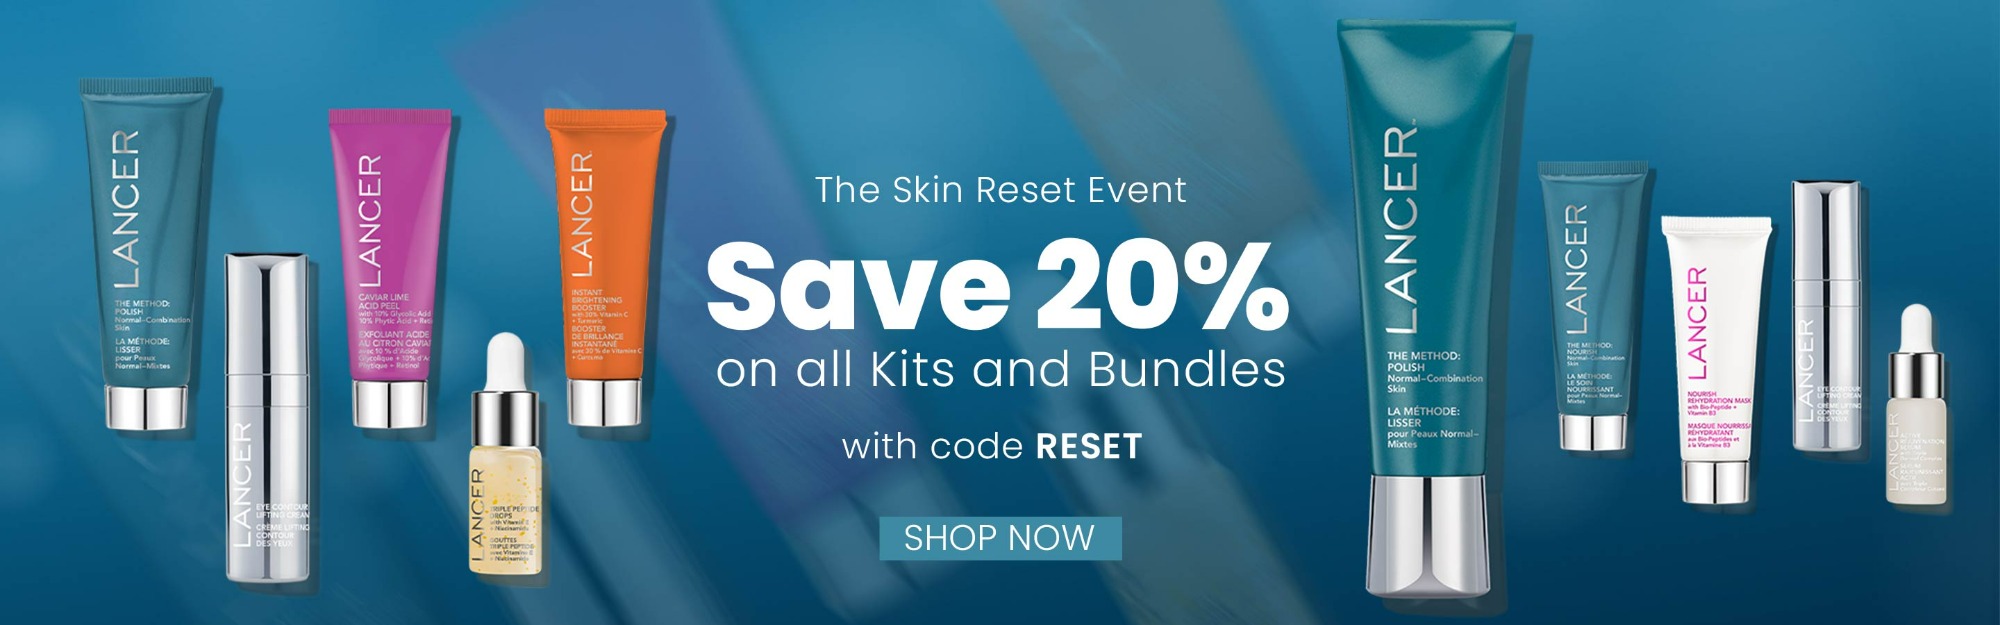 The Skin Reset Event